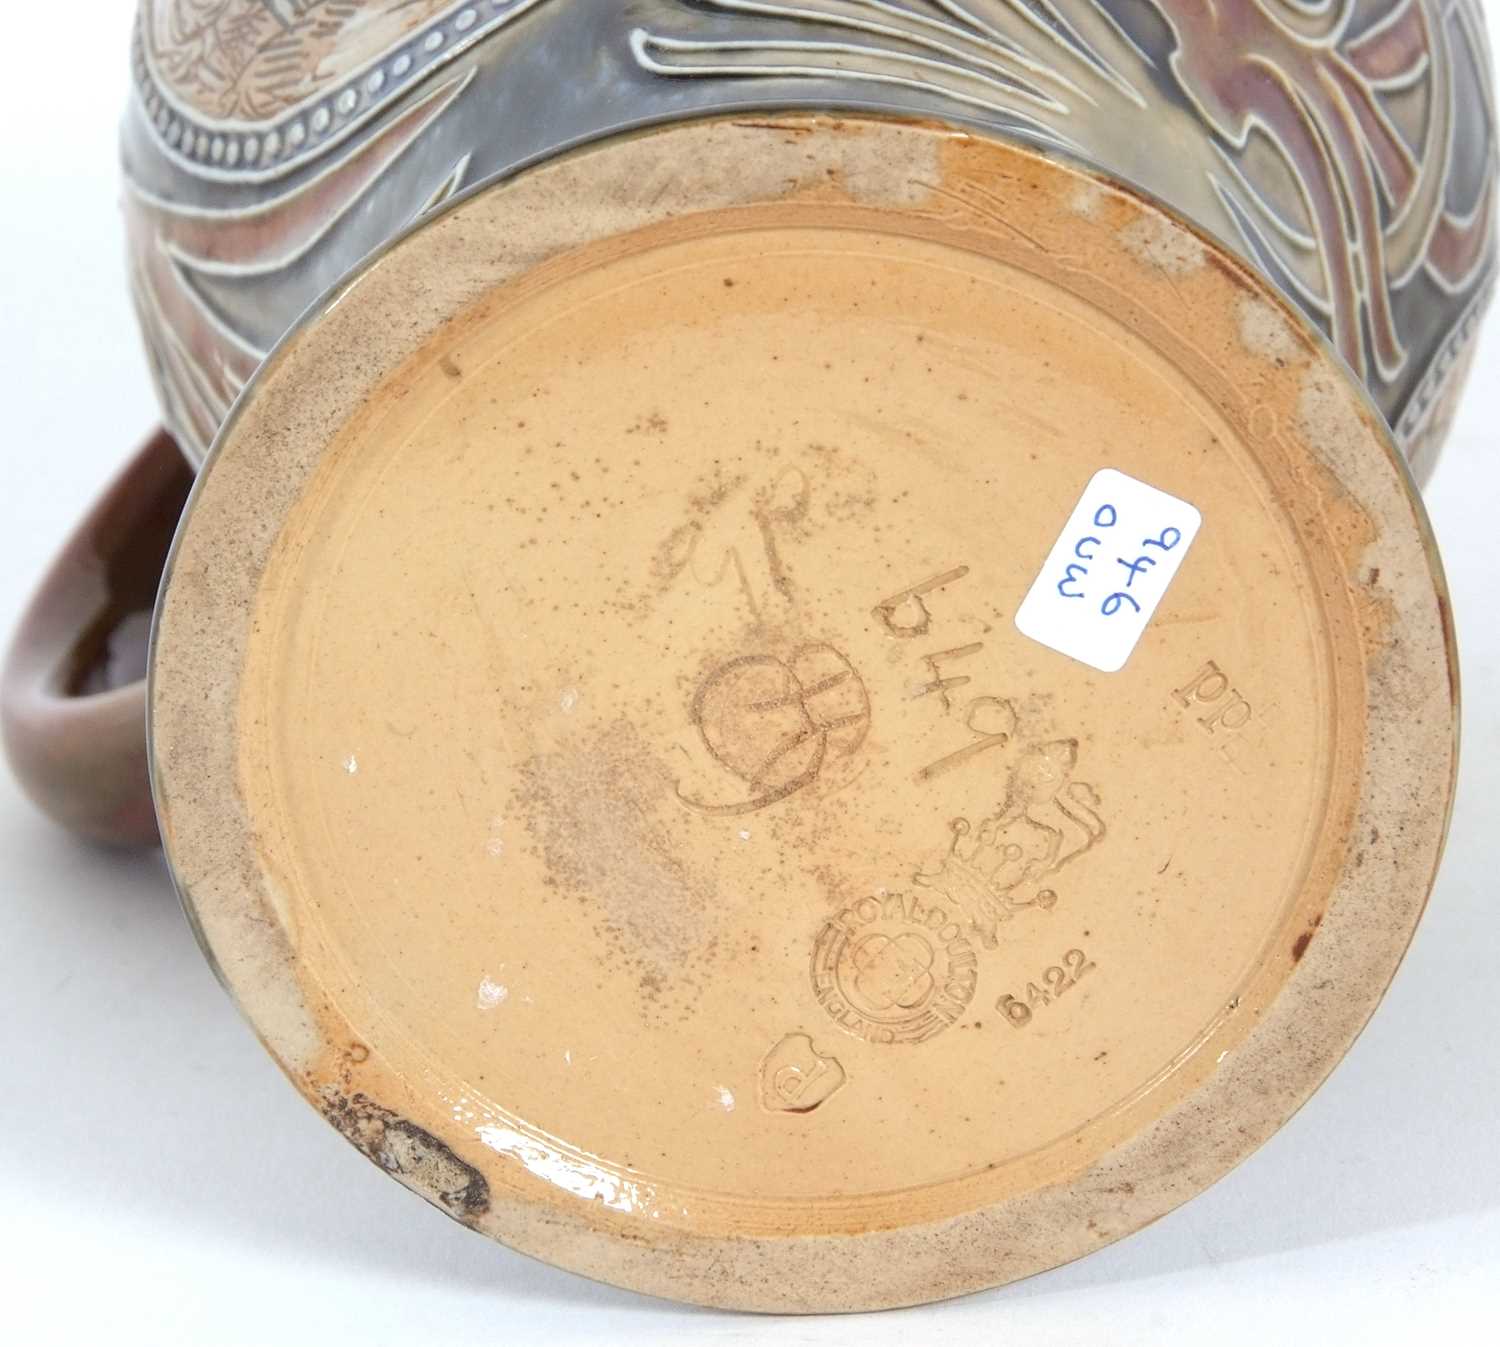 Royal Doulton jug of baluster form with incised Art Nouveau decoration and oval panels of sheep by - Image 6 of 6